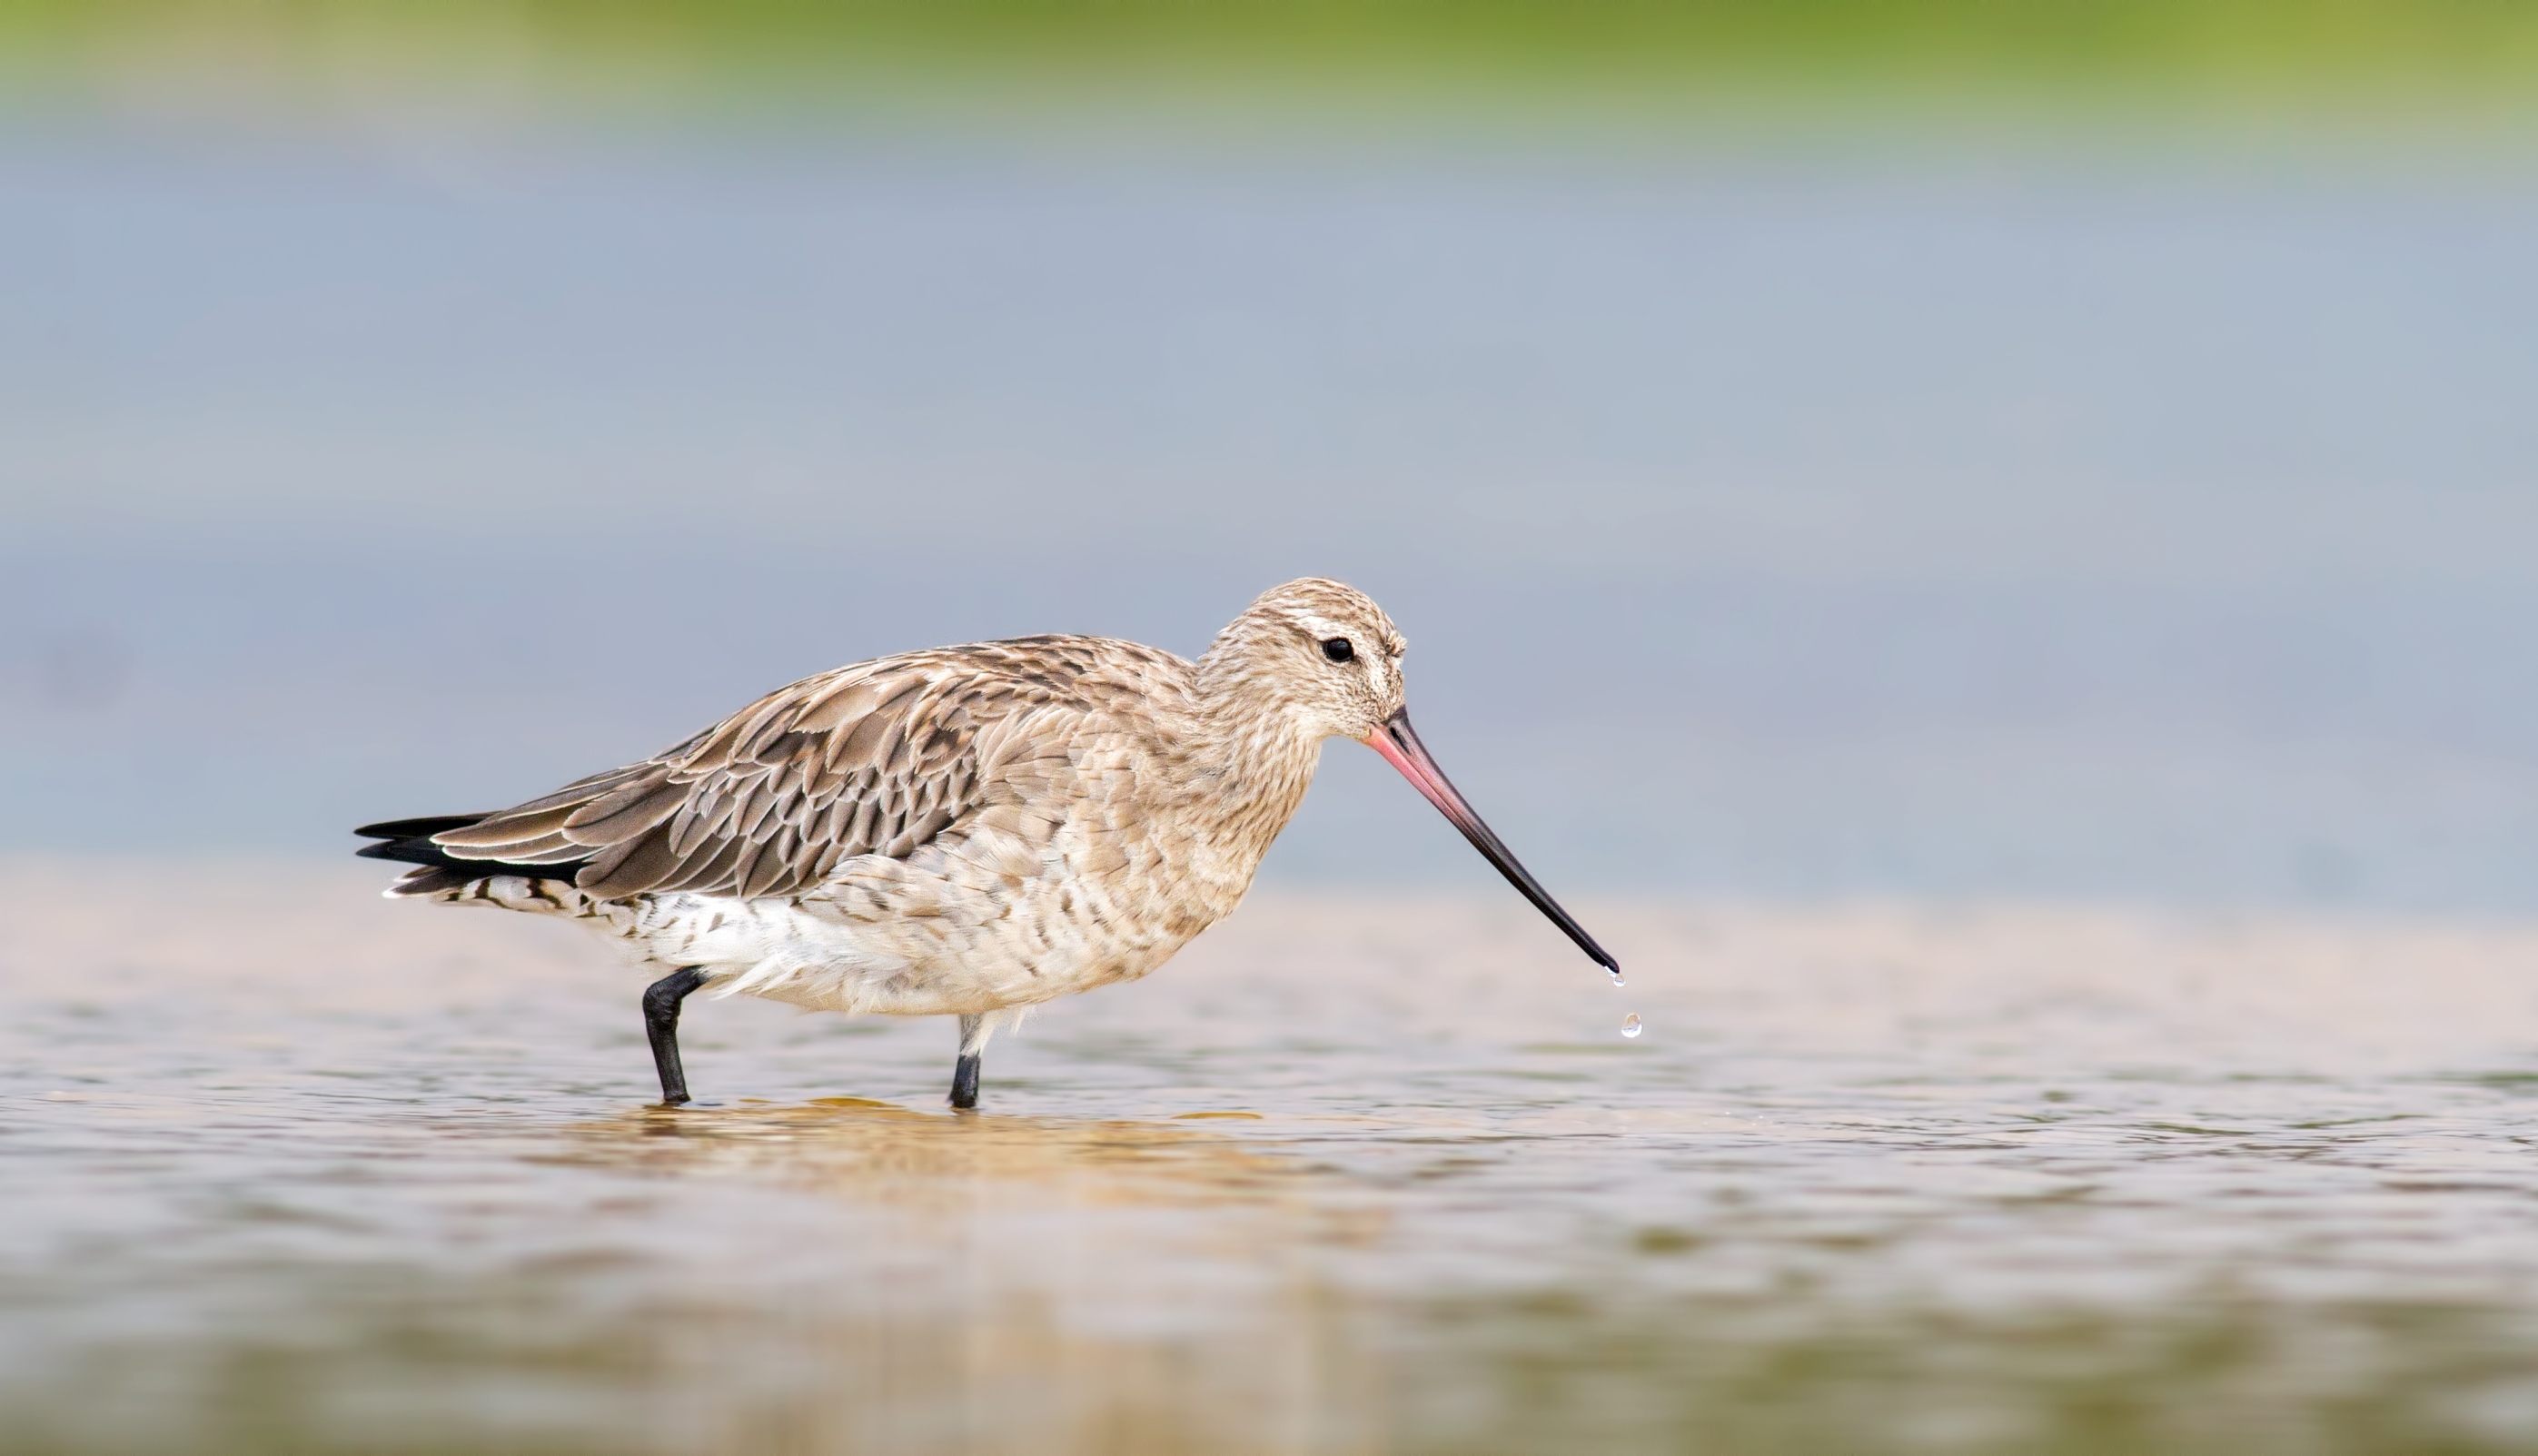 Bar-tailed Godwit in water